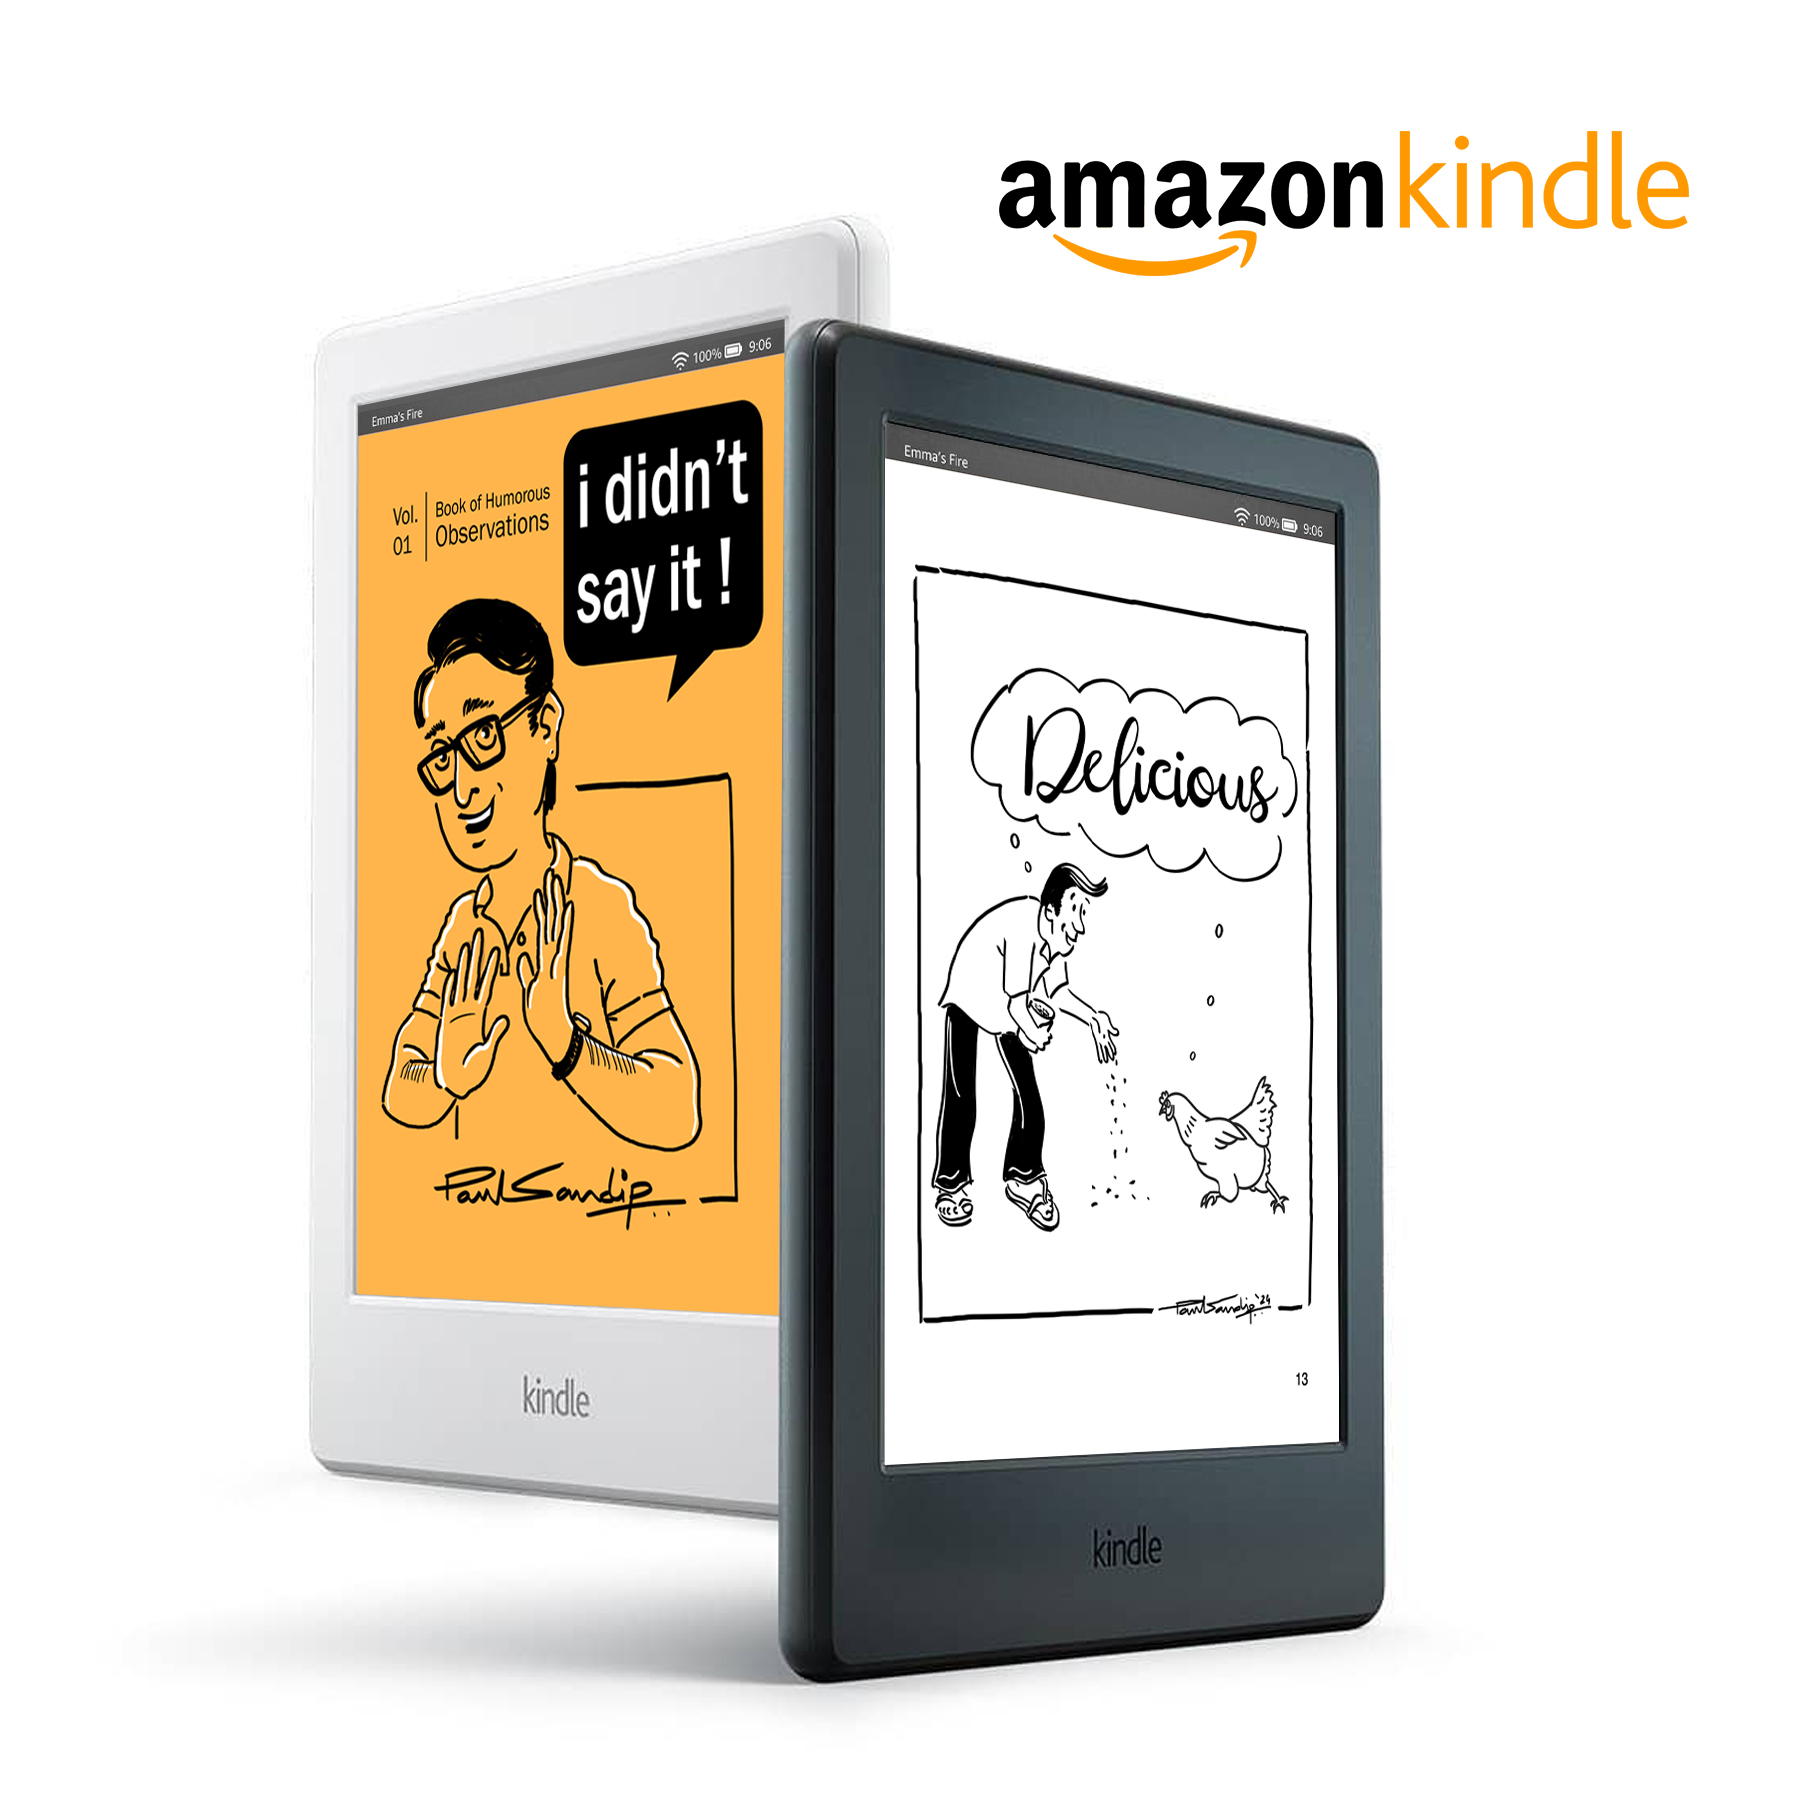 I didnt say it - amazon kindle edition by paul sandip